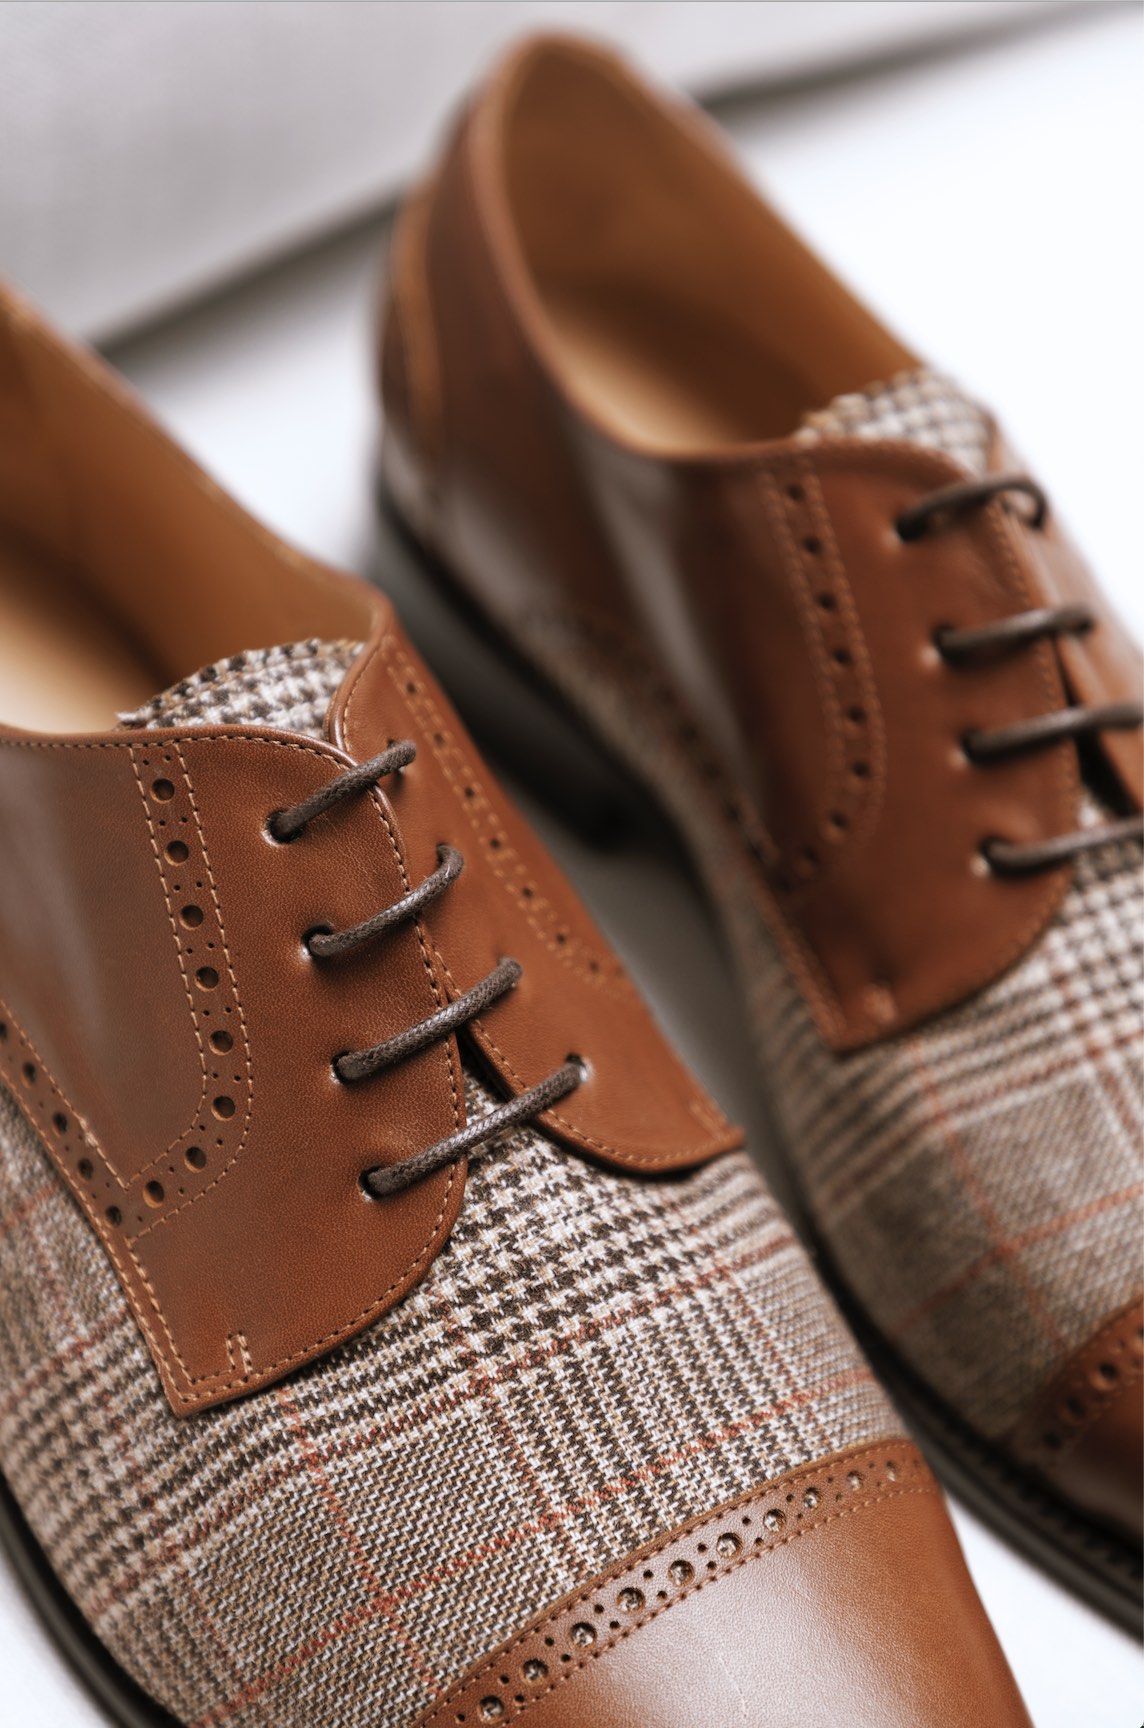 Hockerty "Dips a Toe" Into Crafting Custom Dress Shoes for